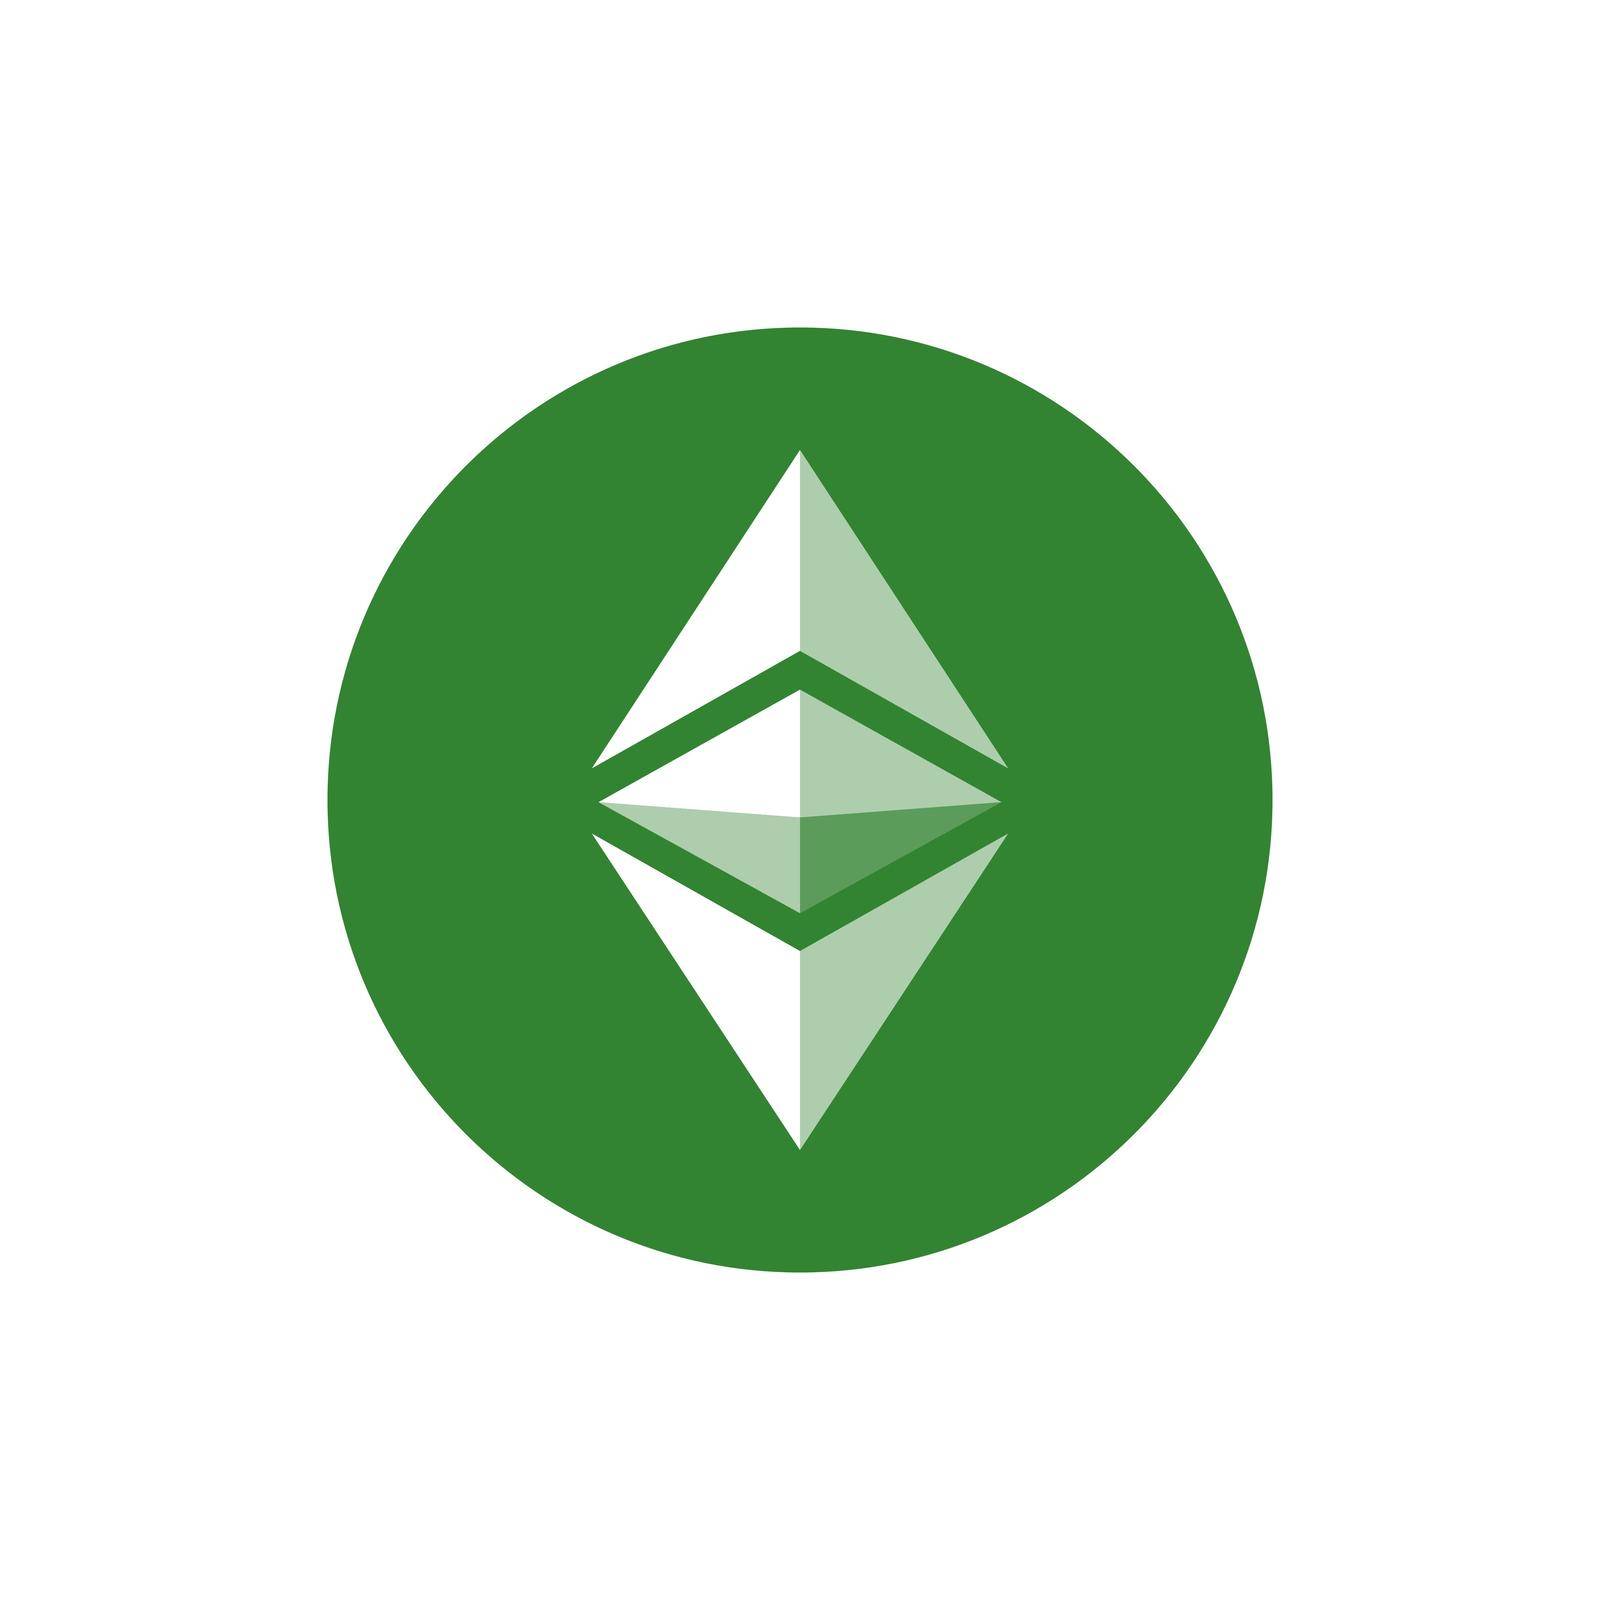 Ethereum Classic coin icon isolated on white background. ETC crypto currency vector. by windawake